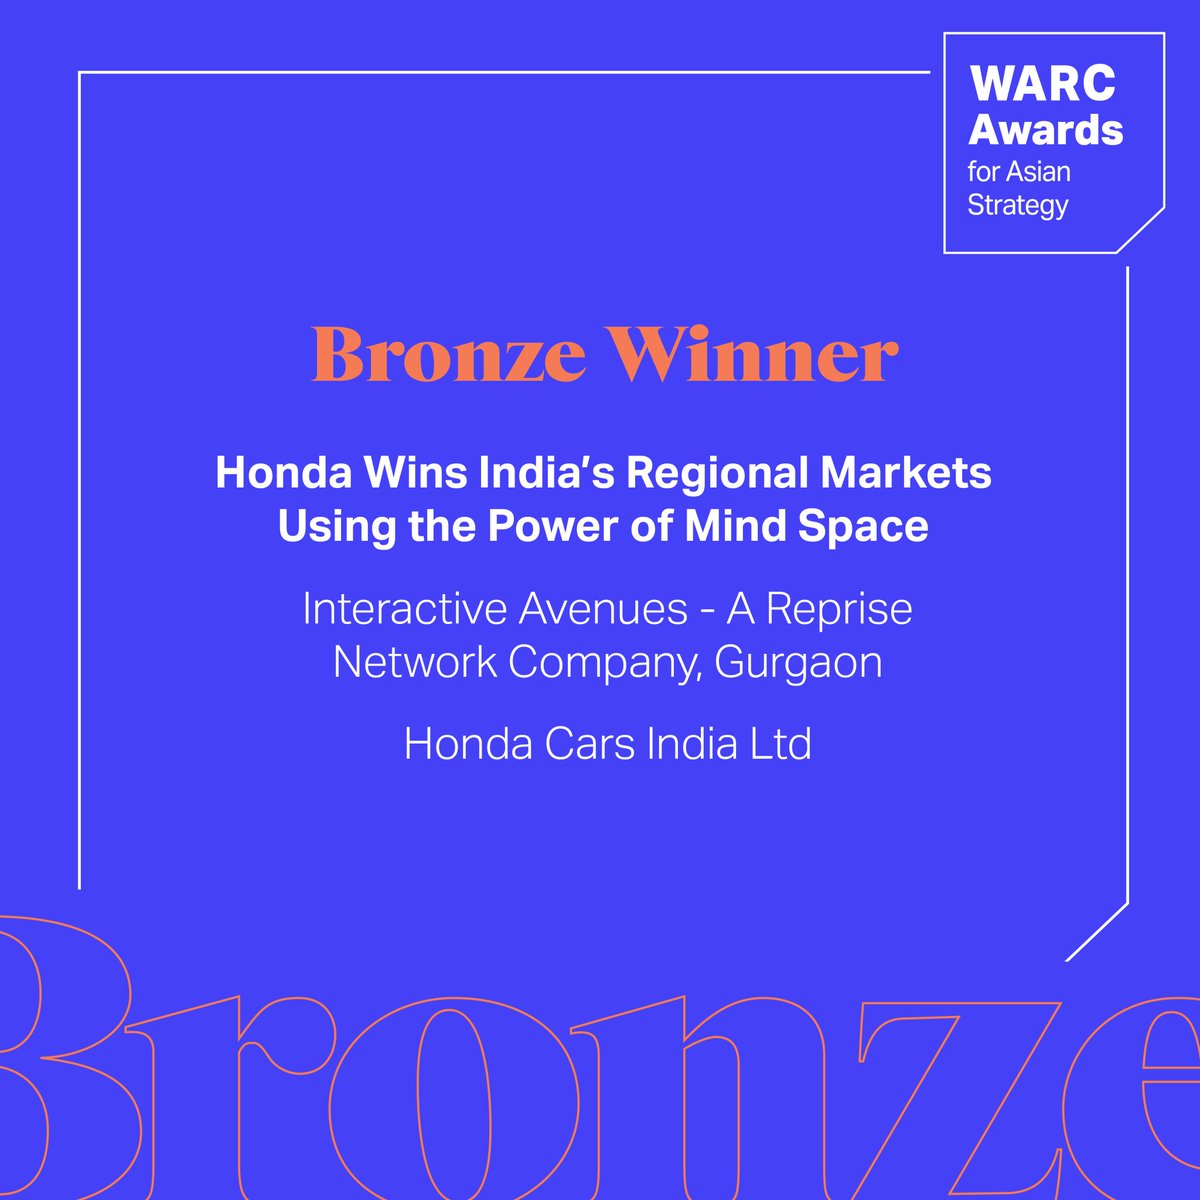 We’re elated to have won a Bronze at the WARC Awards for Asian Strategy! Deeply humbled that our work for Honda Cars India Ltd. has been showcased among the region’s smartest strategies and breakthrough ideas.

#WARCawards #digitalstrategy #problemsolving #marketingawards